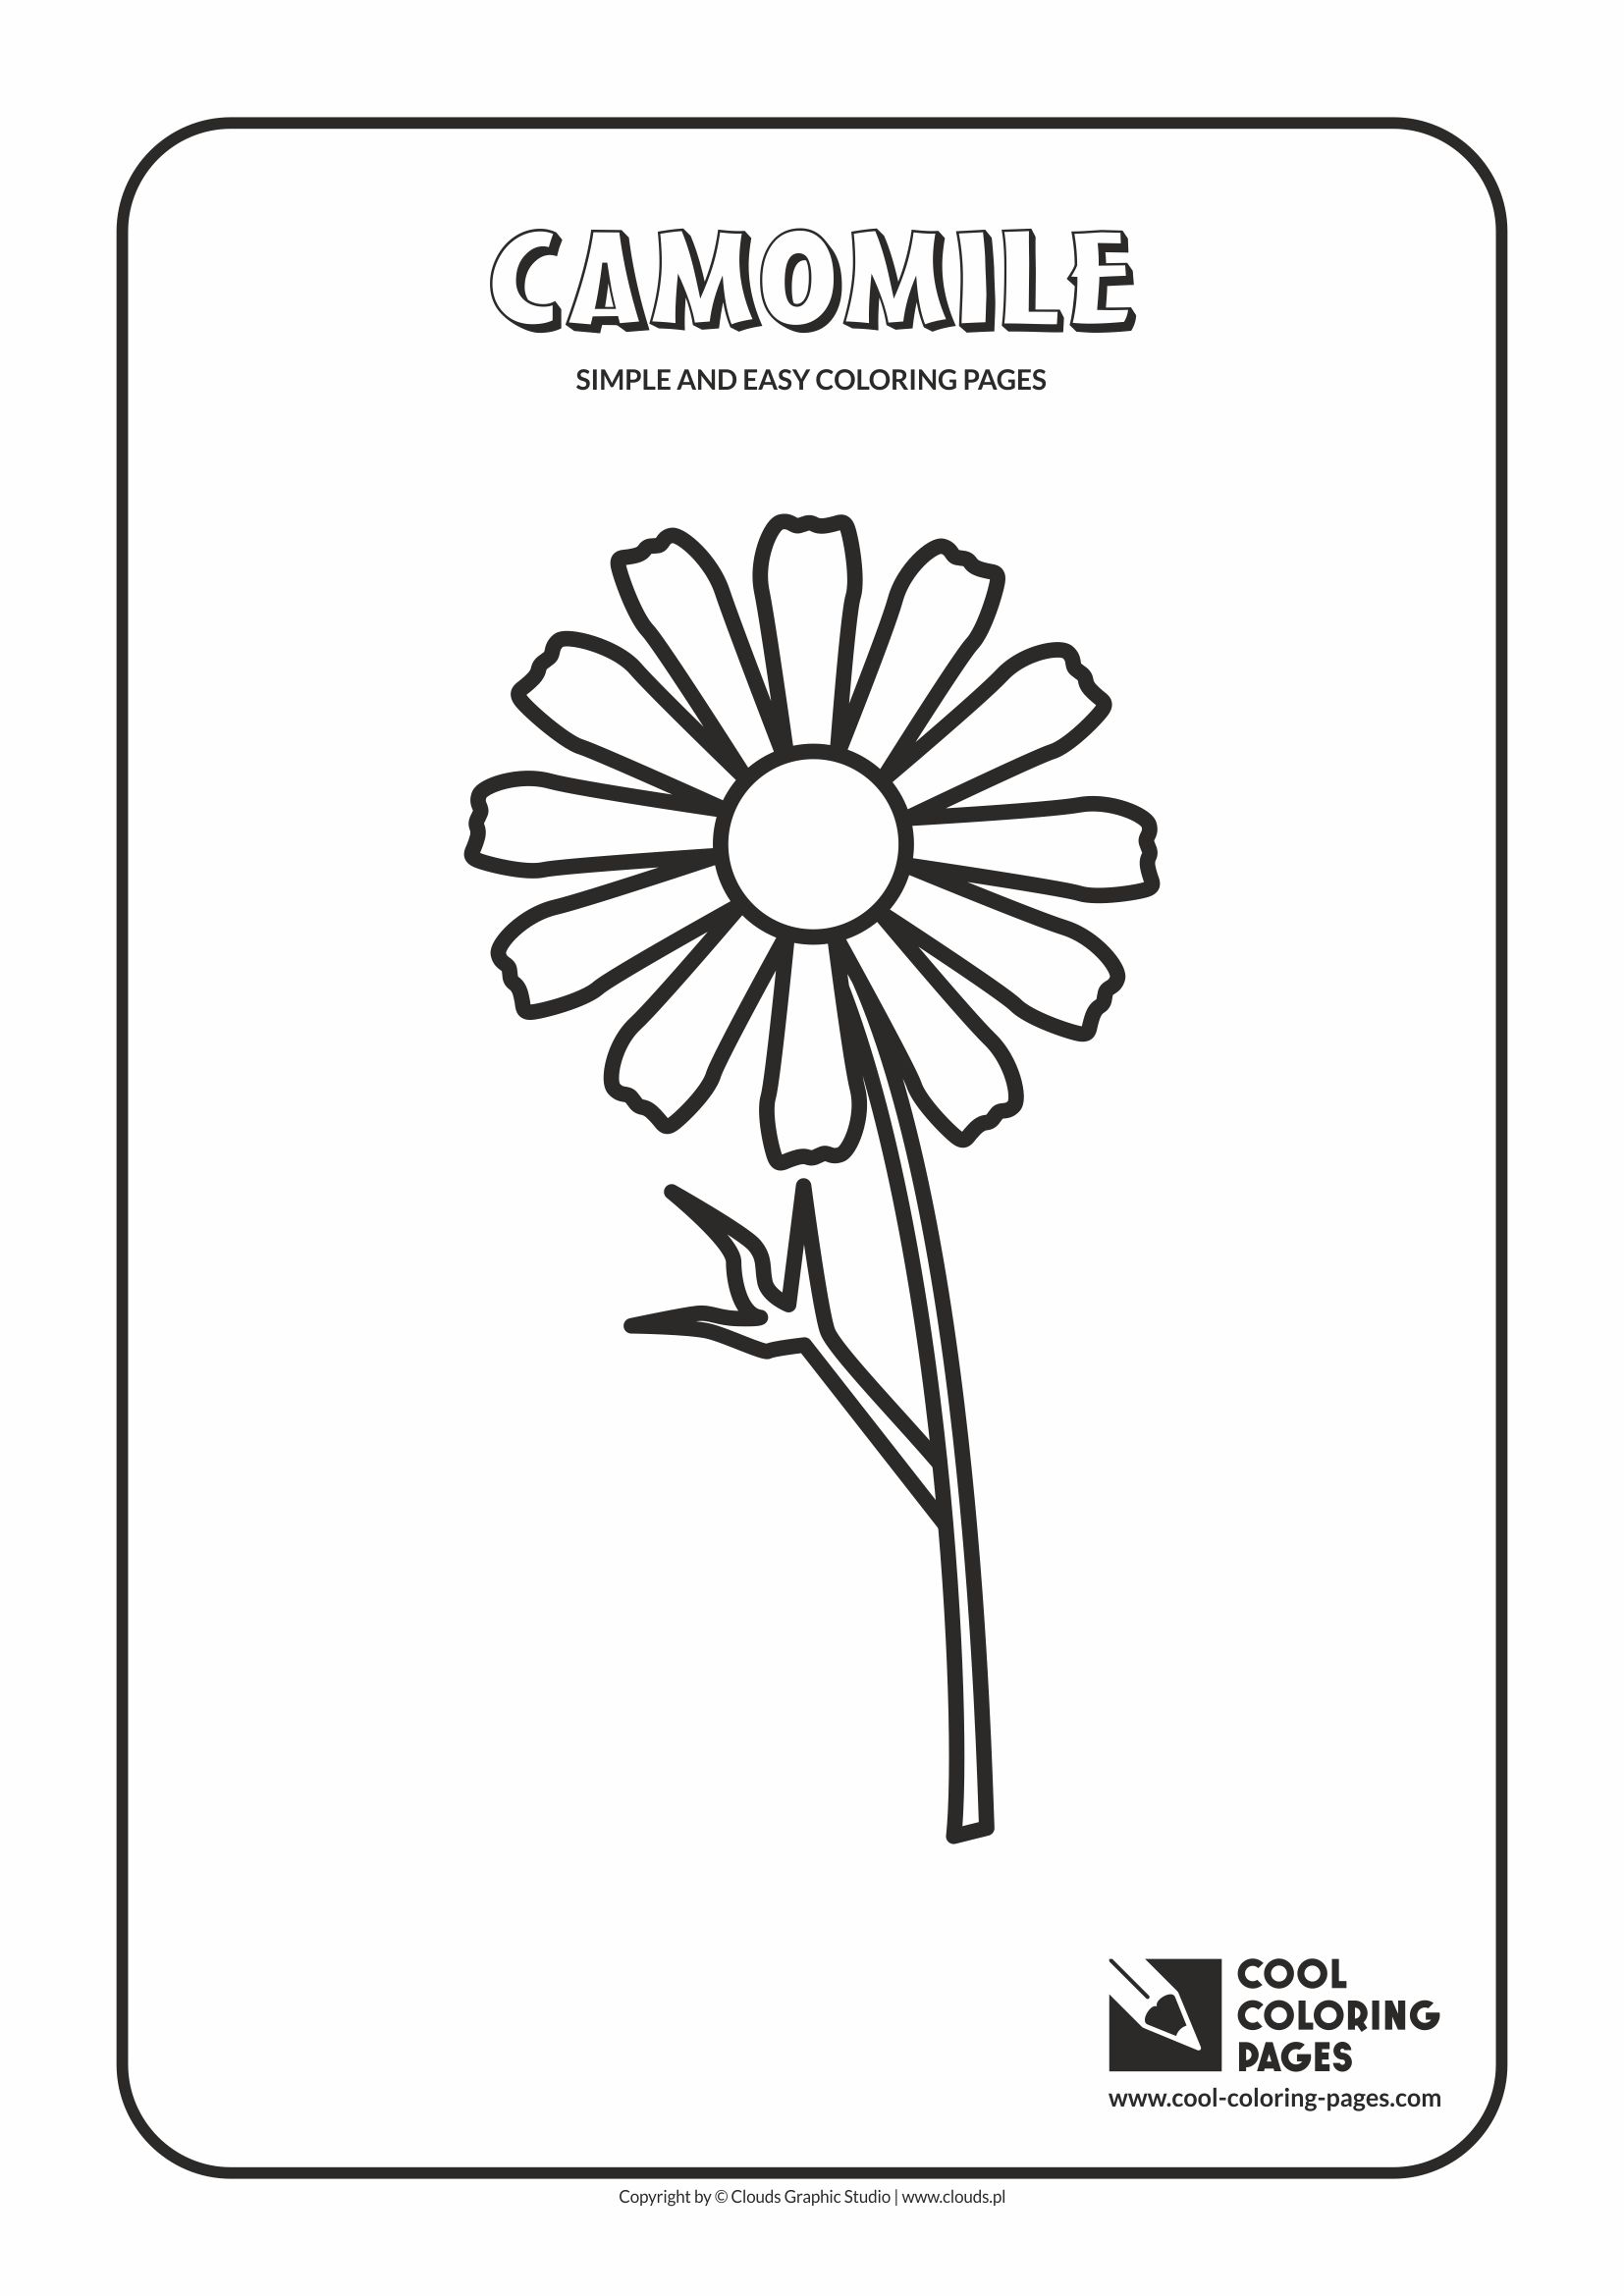 Simple and easy coloring pages for toddlers - Camomile